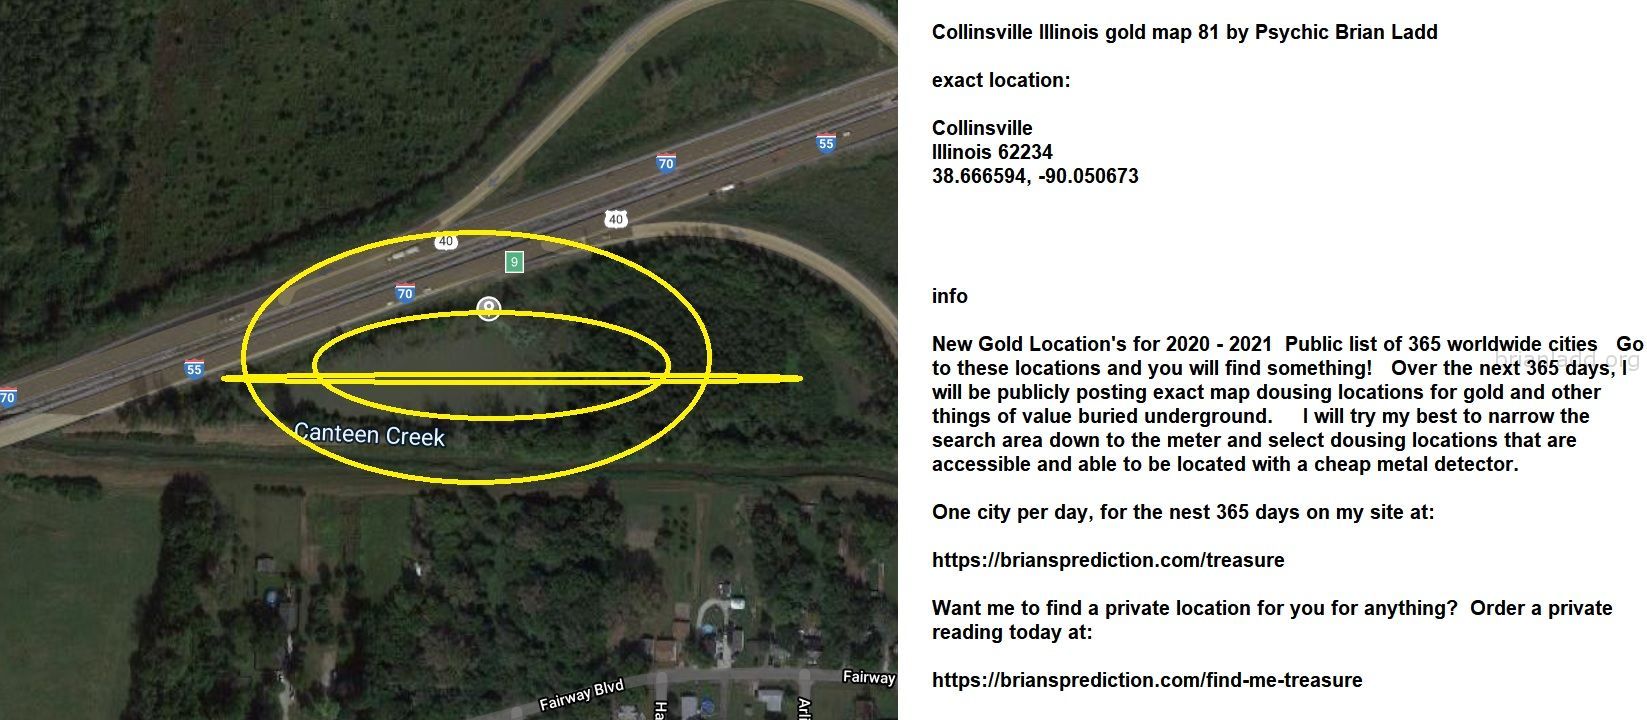 Collinsville Illinois Gold Map 81 By Psychic Brian Ladd - Collinsville Illinois Gold Map 81 By Psychic Brian Ladd  Exact...
Collinsville Illinois Gold Map 81 By Psychic Brian Ladd  Exact Location:  Collinsville  Illinois 62234  38.666594, -90.050673  Info  New Gold Location'S For 2020 - 2021  Public List Of 365 Worldwide Cities  Go To These Locations And You Will Find Something!  Over The Next 365 Days, I Will Be Publicly Posting Exact Map Dousing Locations For Gold And Other Things Of Value Buried Underground.  I Will Try My Best To Narrow The Search Area Down To The Meter And Select Dousing Locations That Are Accessible And Able To Be Located With A Cheap Metal Detector.  One City Per Day, For The Nest 365 Days On My Site At:   https://briansprediction.com/Treasure  Want Me To Find A Private Location For You For Anything?  Order A Private Reading Today At:   https://briansprediction.com/Find-Me-Treasure
